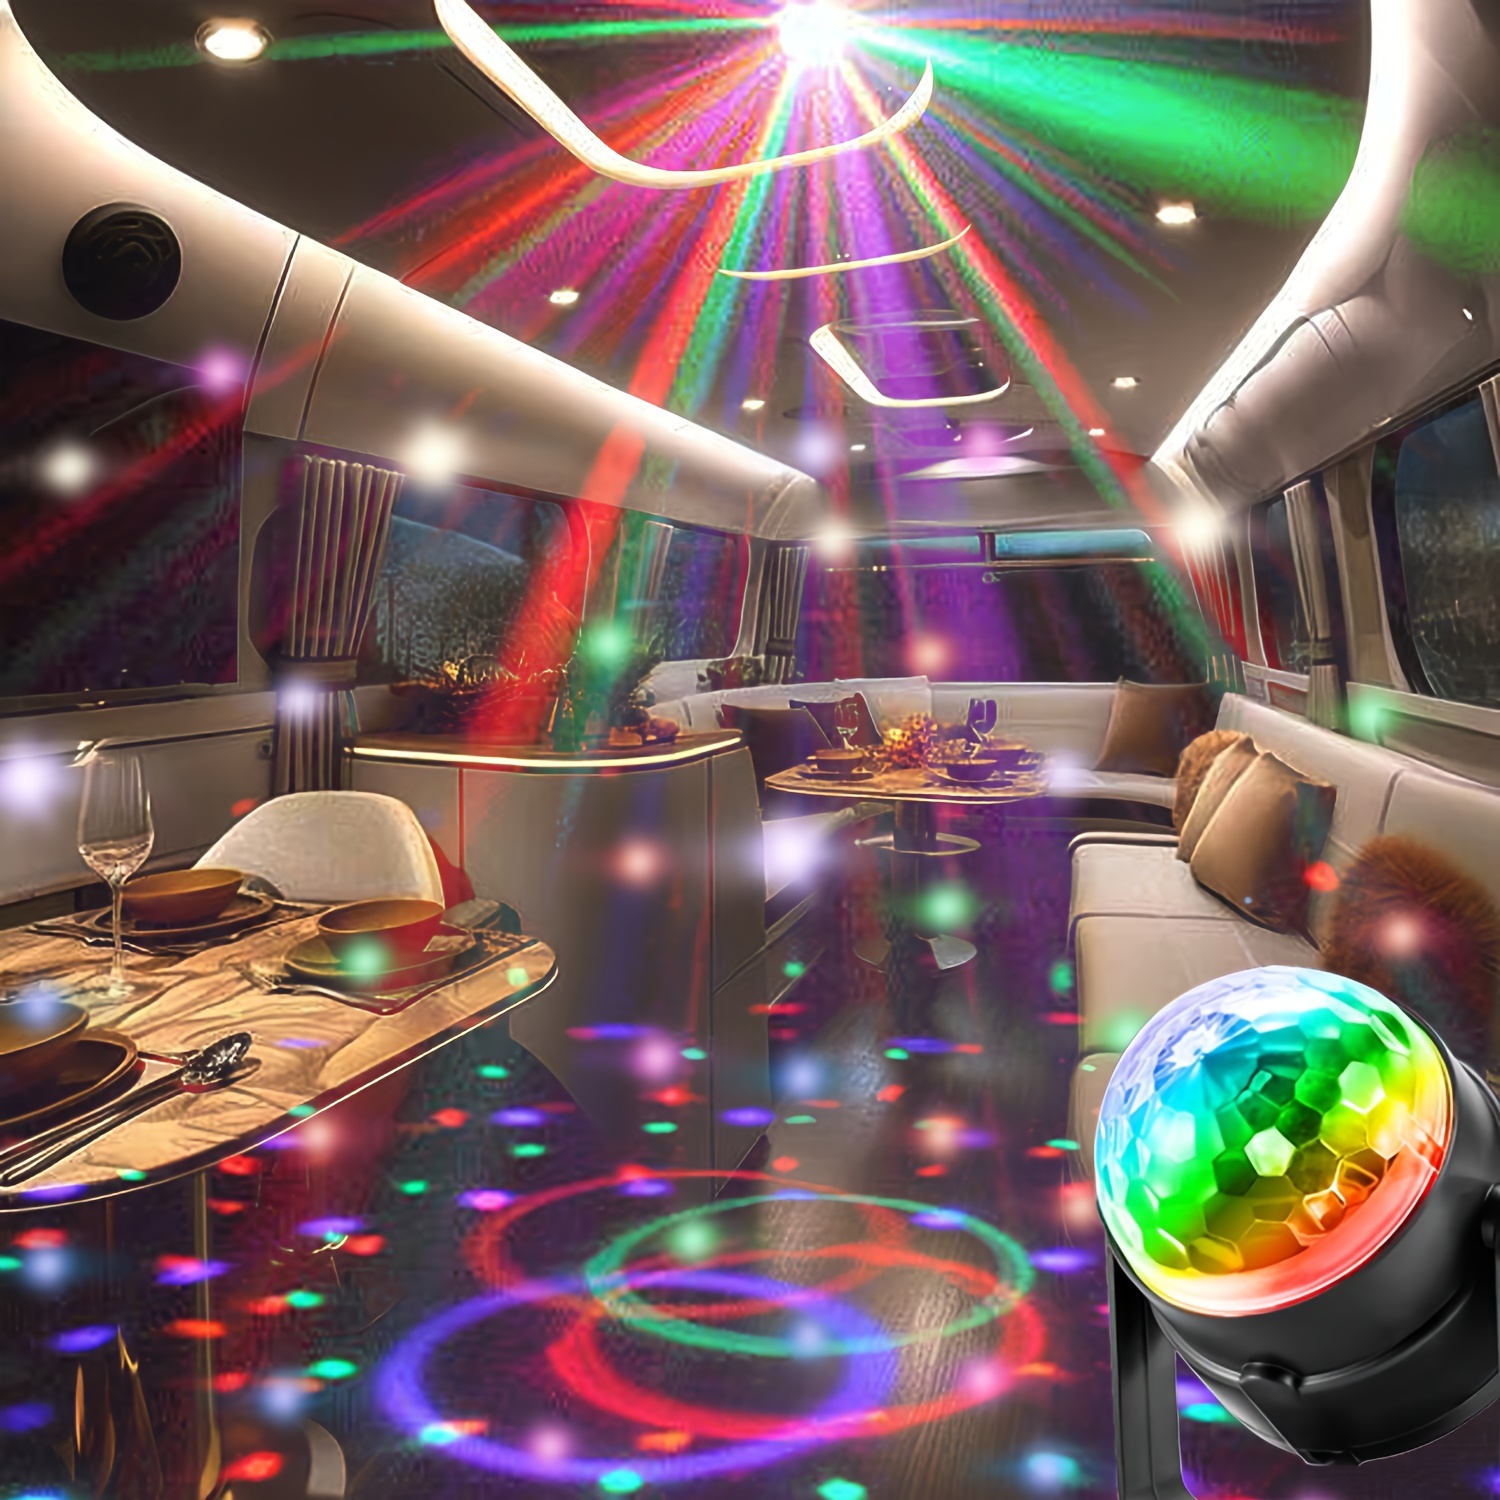 Luditek Sound Activated Party Lights with Remote Control Dj Lighting RBG  Disco Ball Strobe Lamp 7 Modes Stage Par Light for Home Room Dance Parties